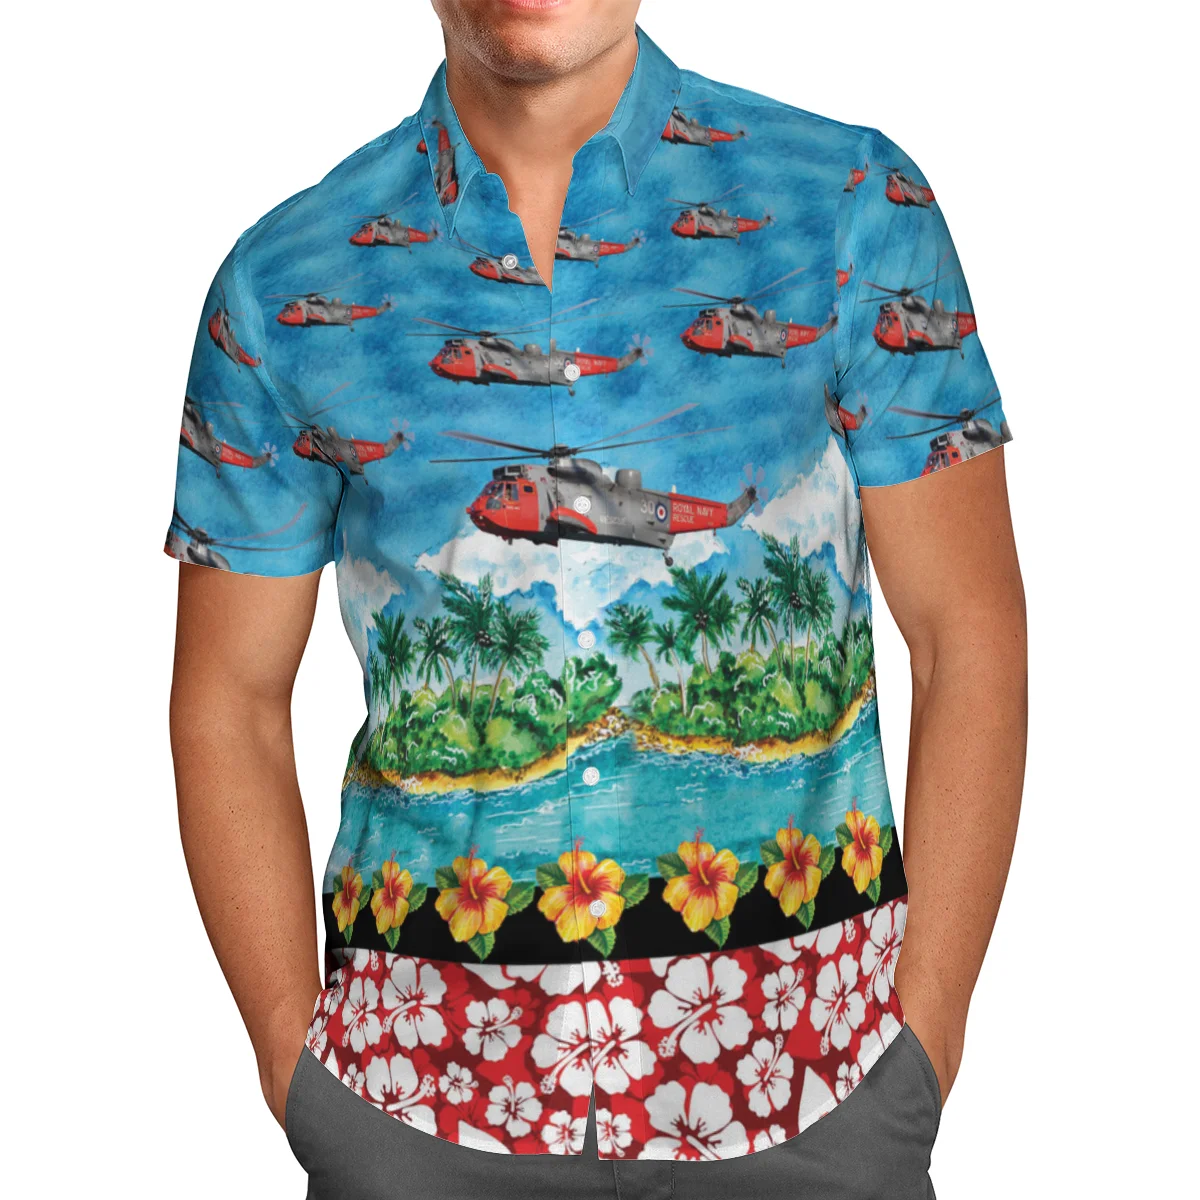 

Helicopter Print Short Sleeve Shirts For Men Loose Cardigan Button Shirt Plus Size Hawaiian Style Summer 2021 Ventilated Shirt17